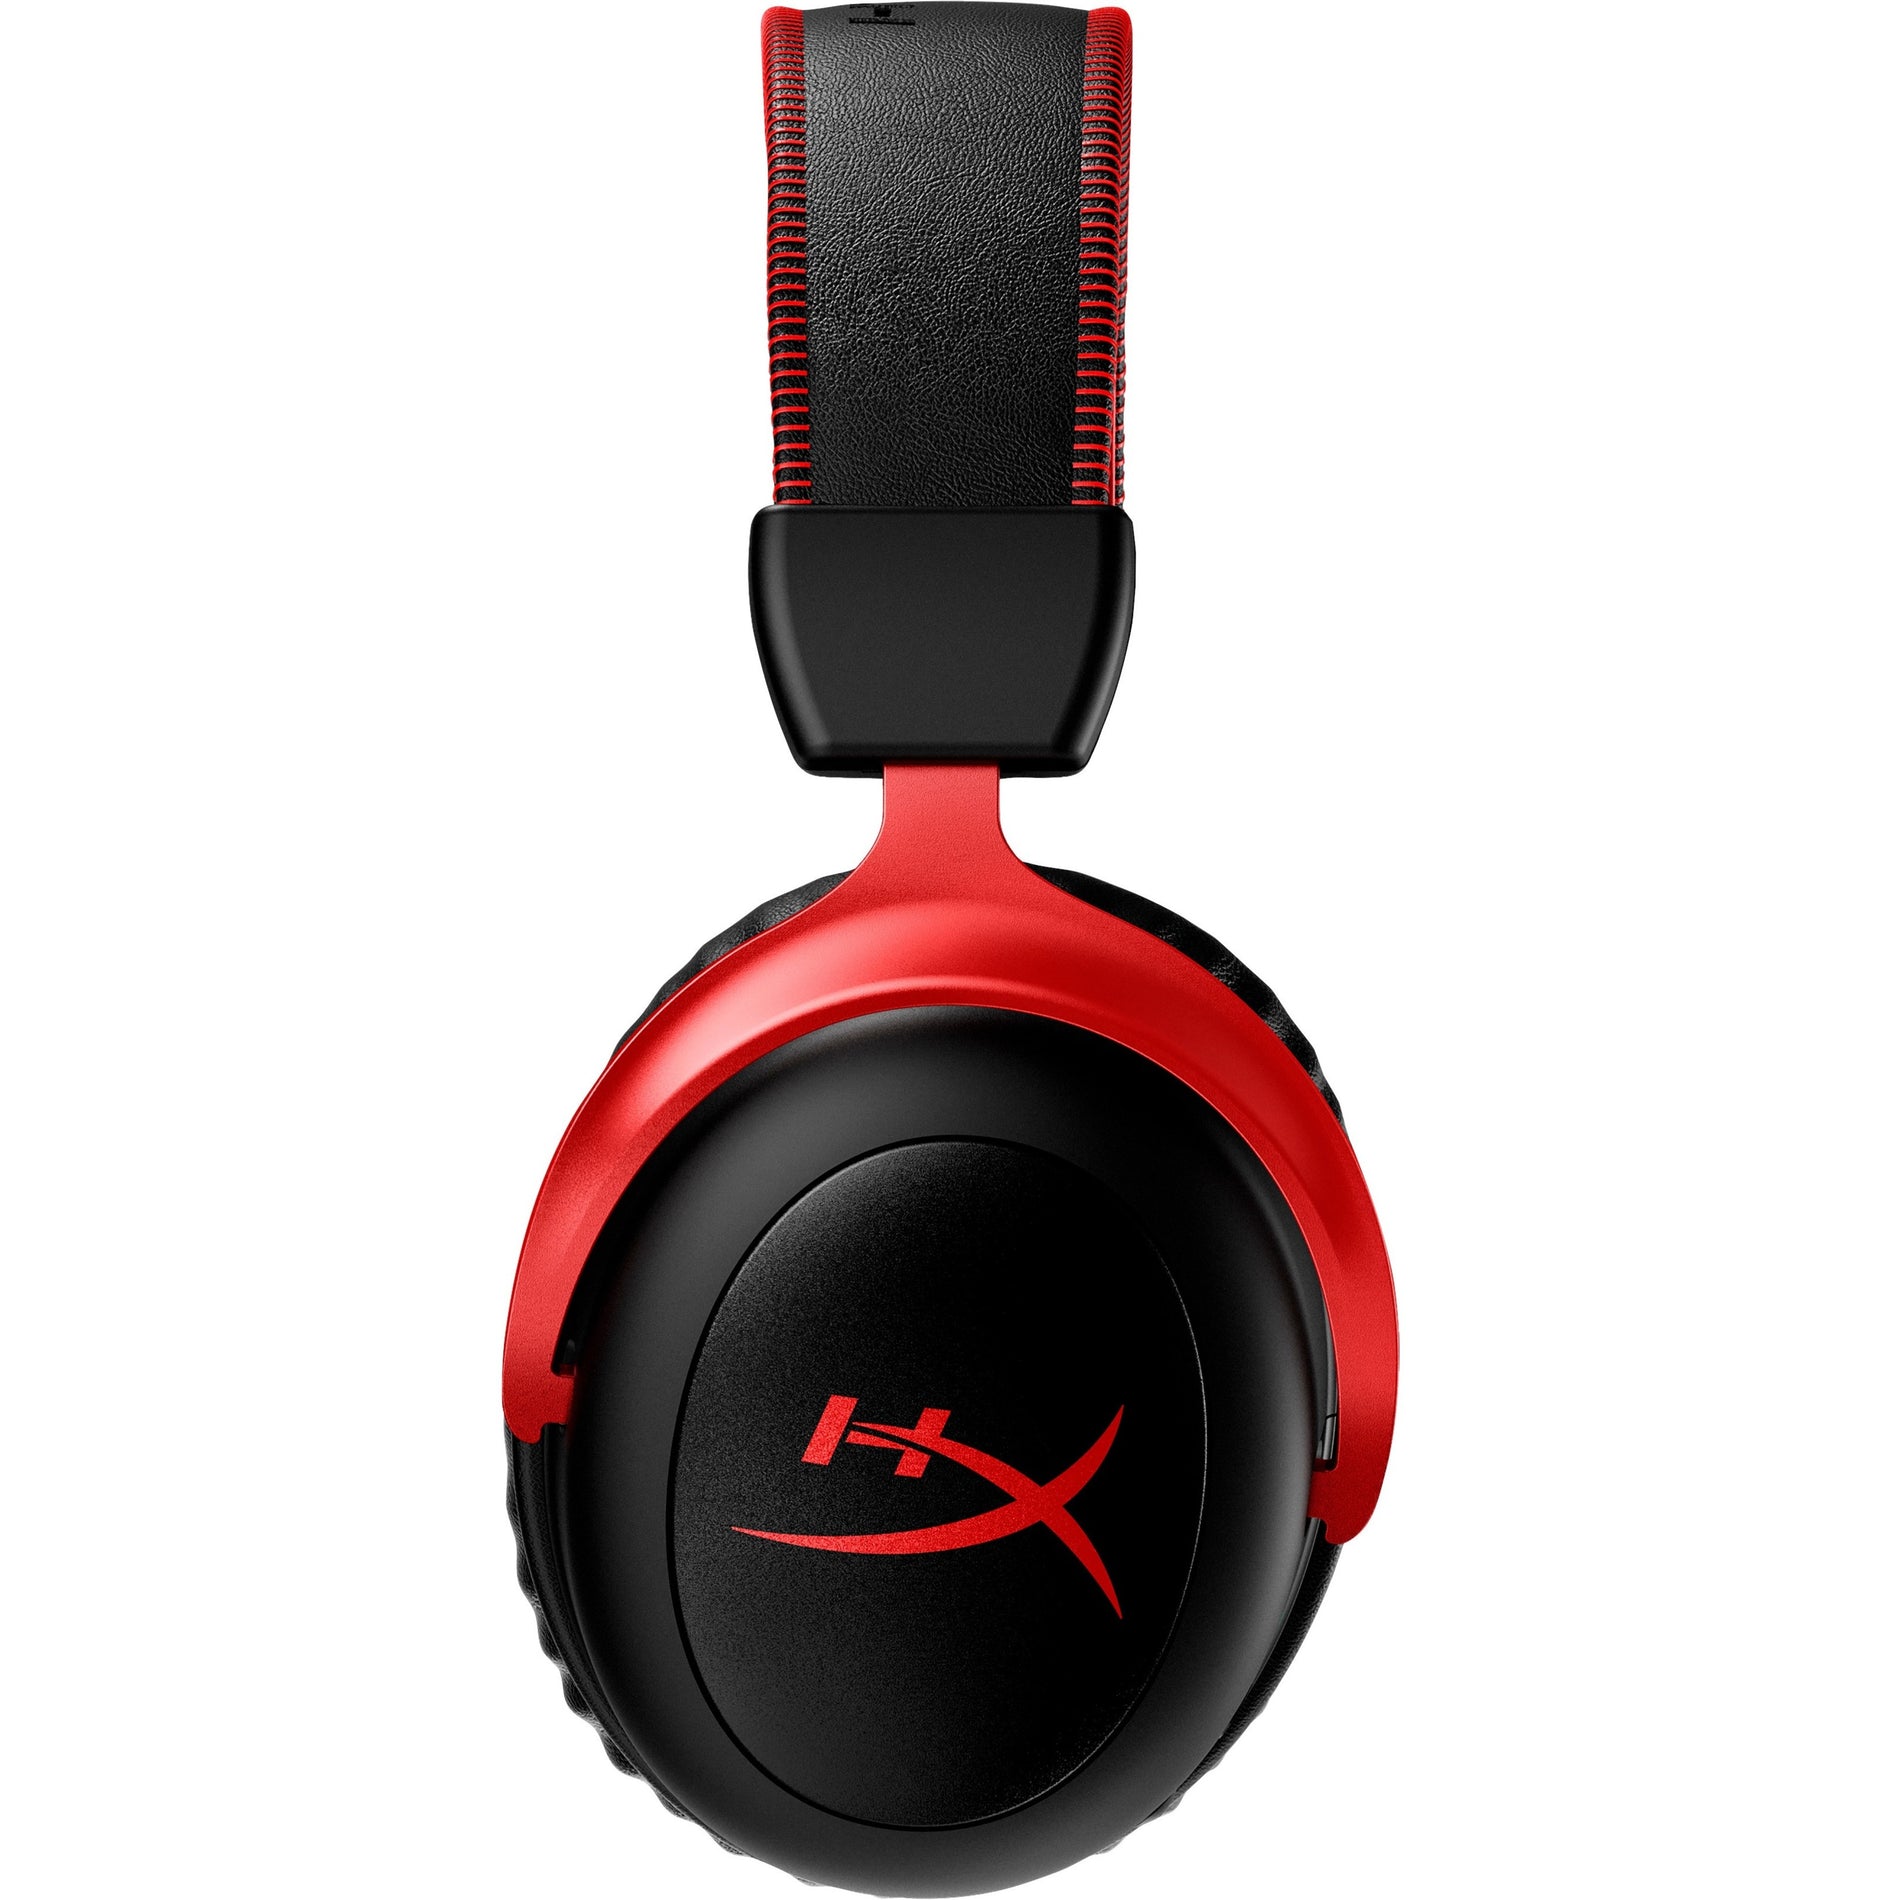 HyperX 4P5K4AA Cloud II Wireless Gaming Headset (Black-Red), Rechargeable Battery, 7.1 Surround Sound